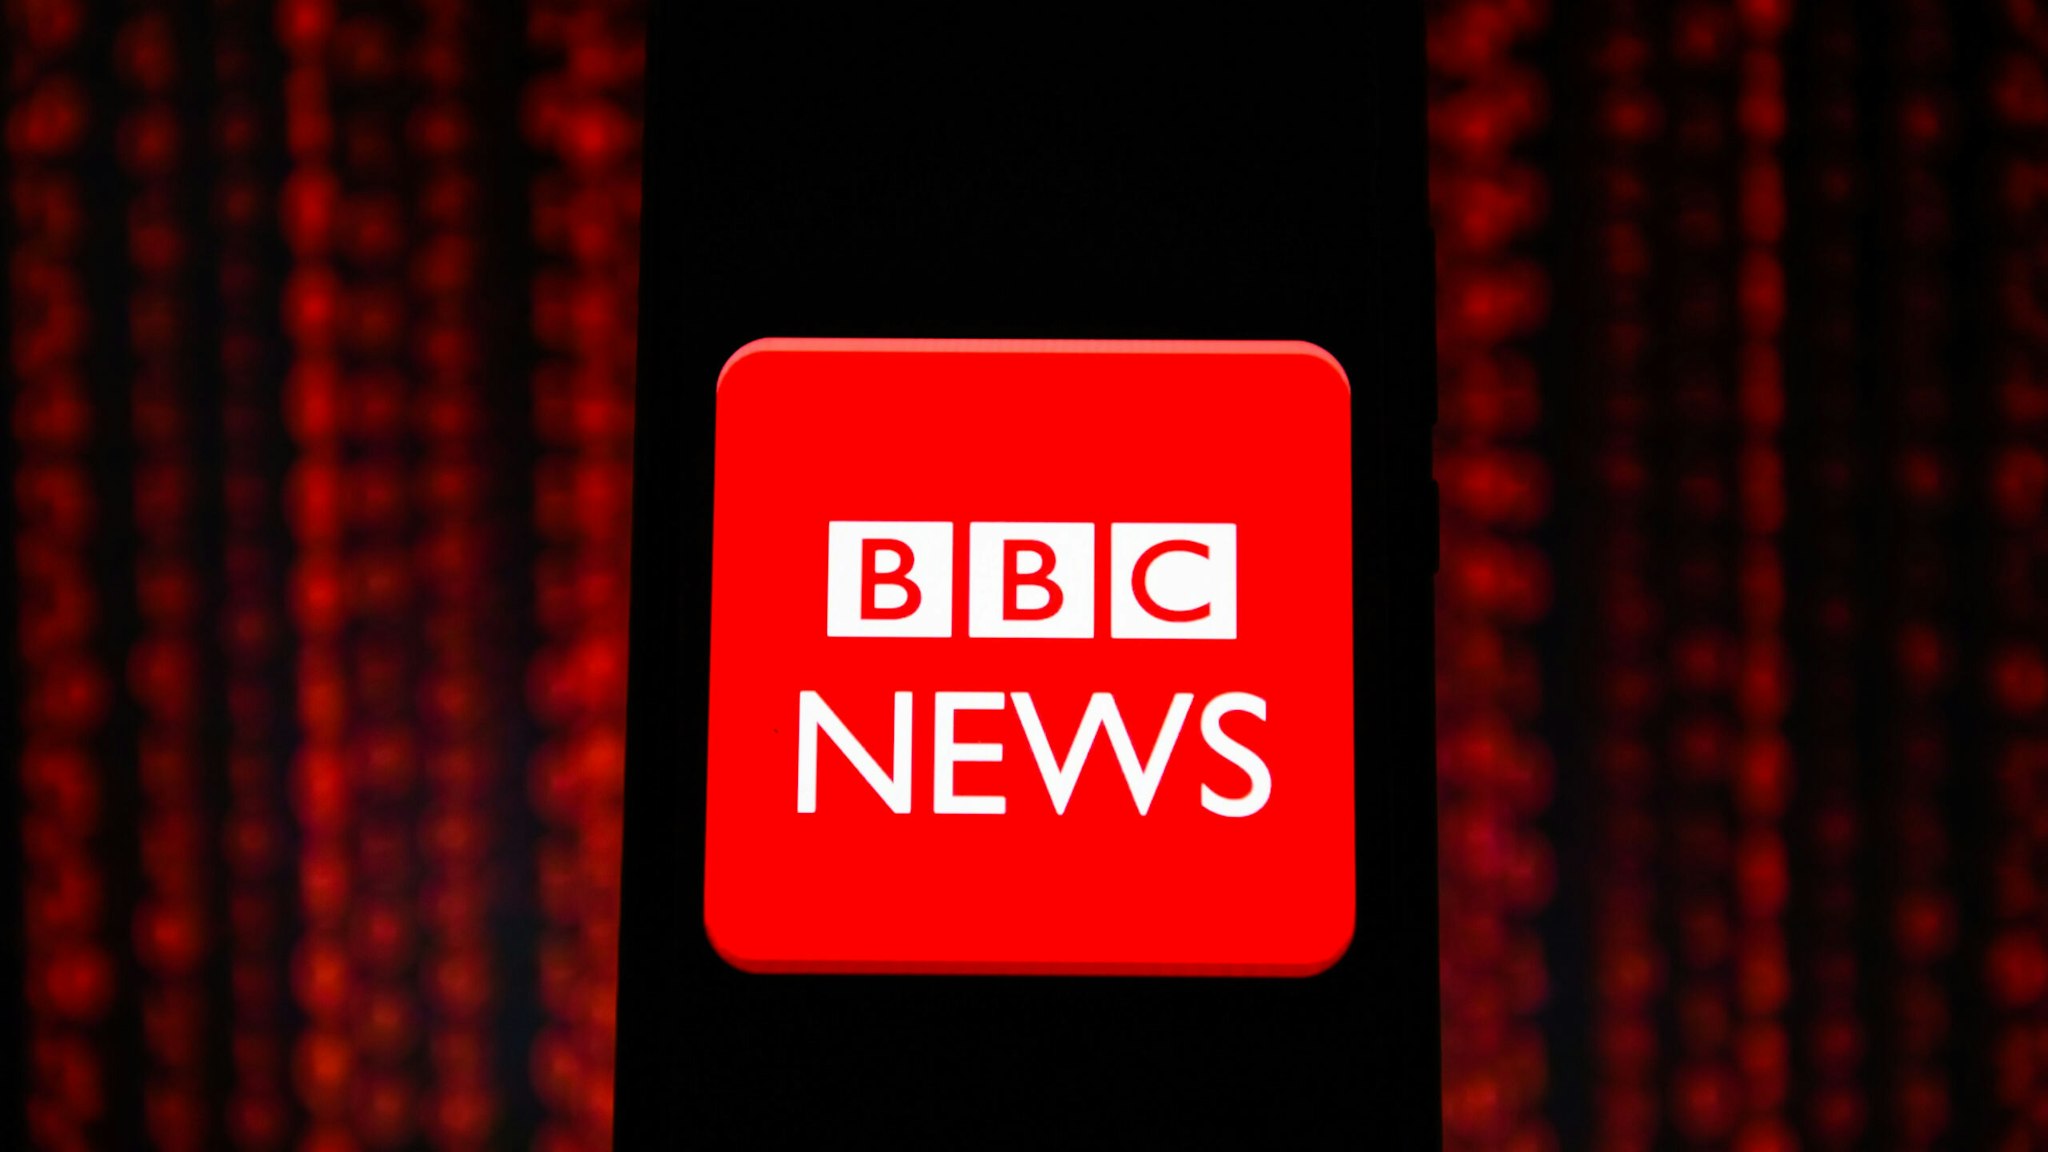 POLAND - 2020/02/23: In this photo illustration a BBC news logo seen displayed on a smartphone.